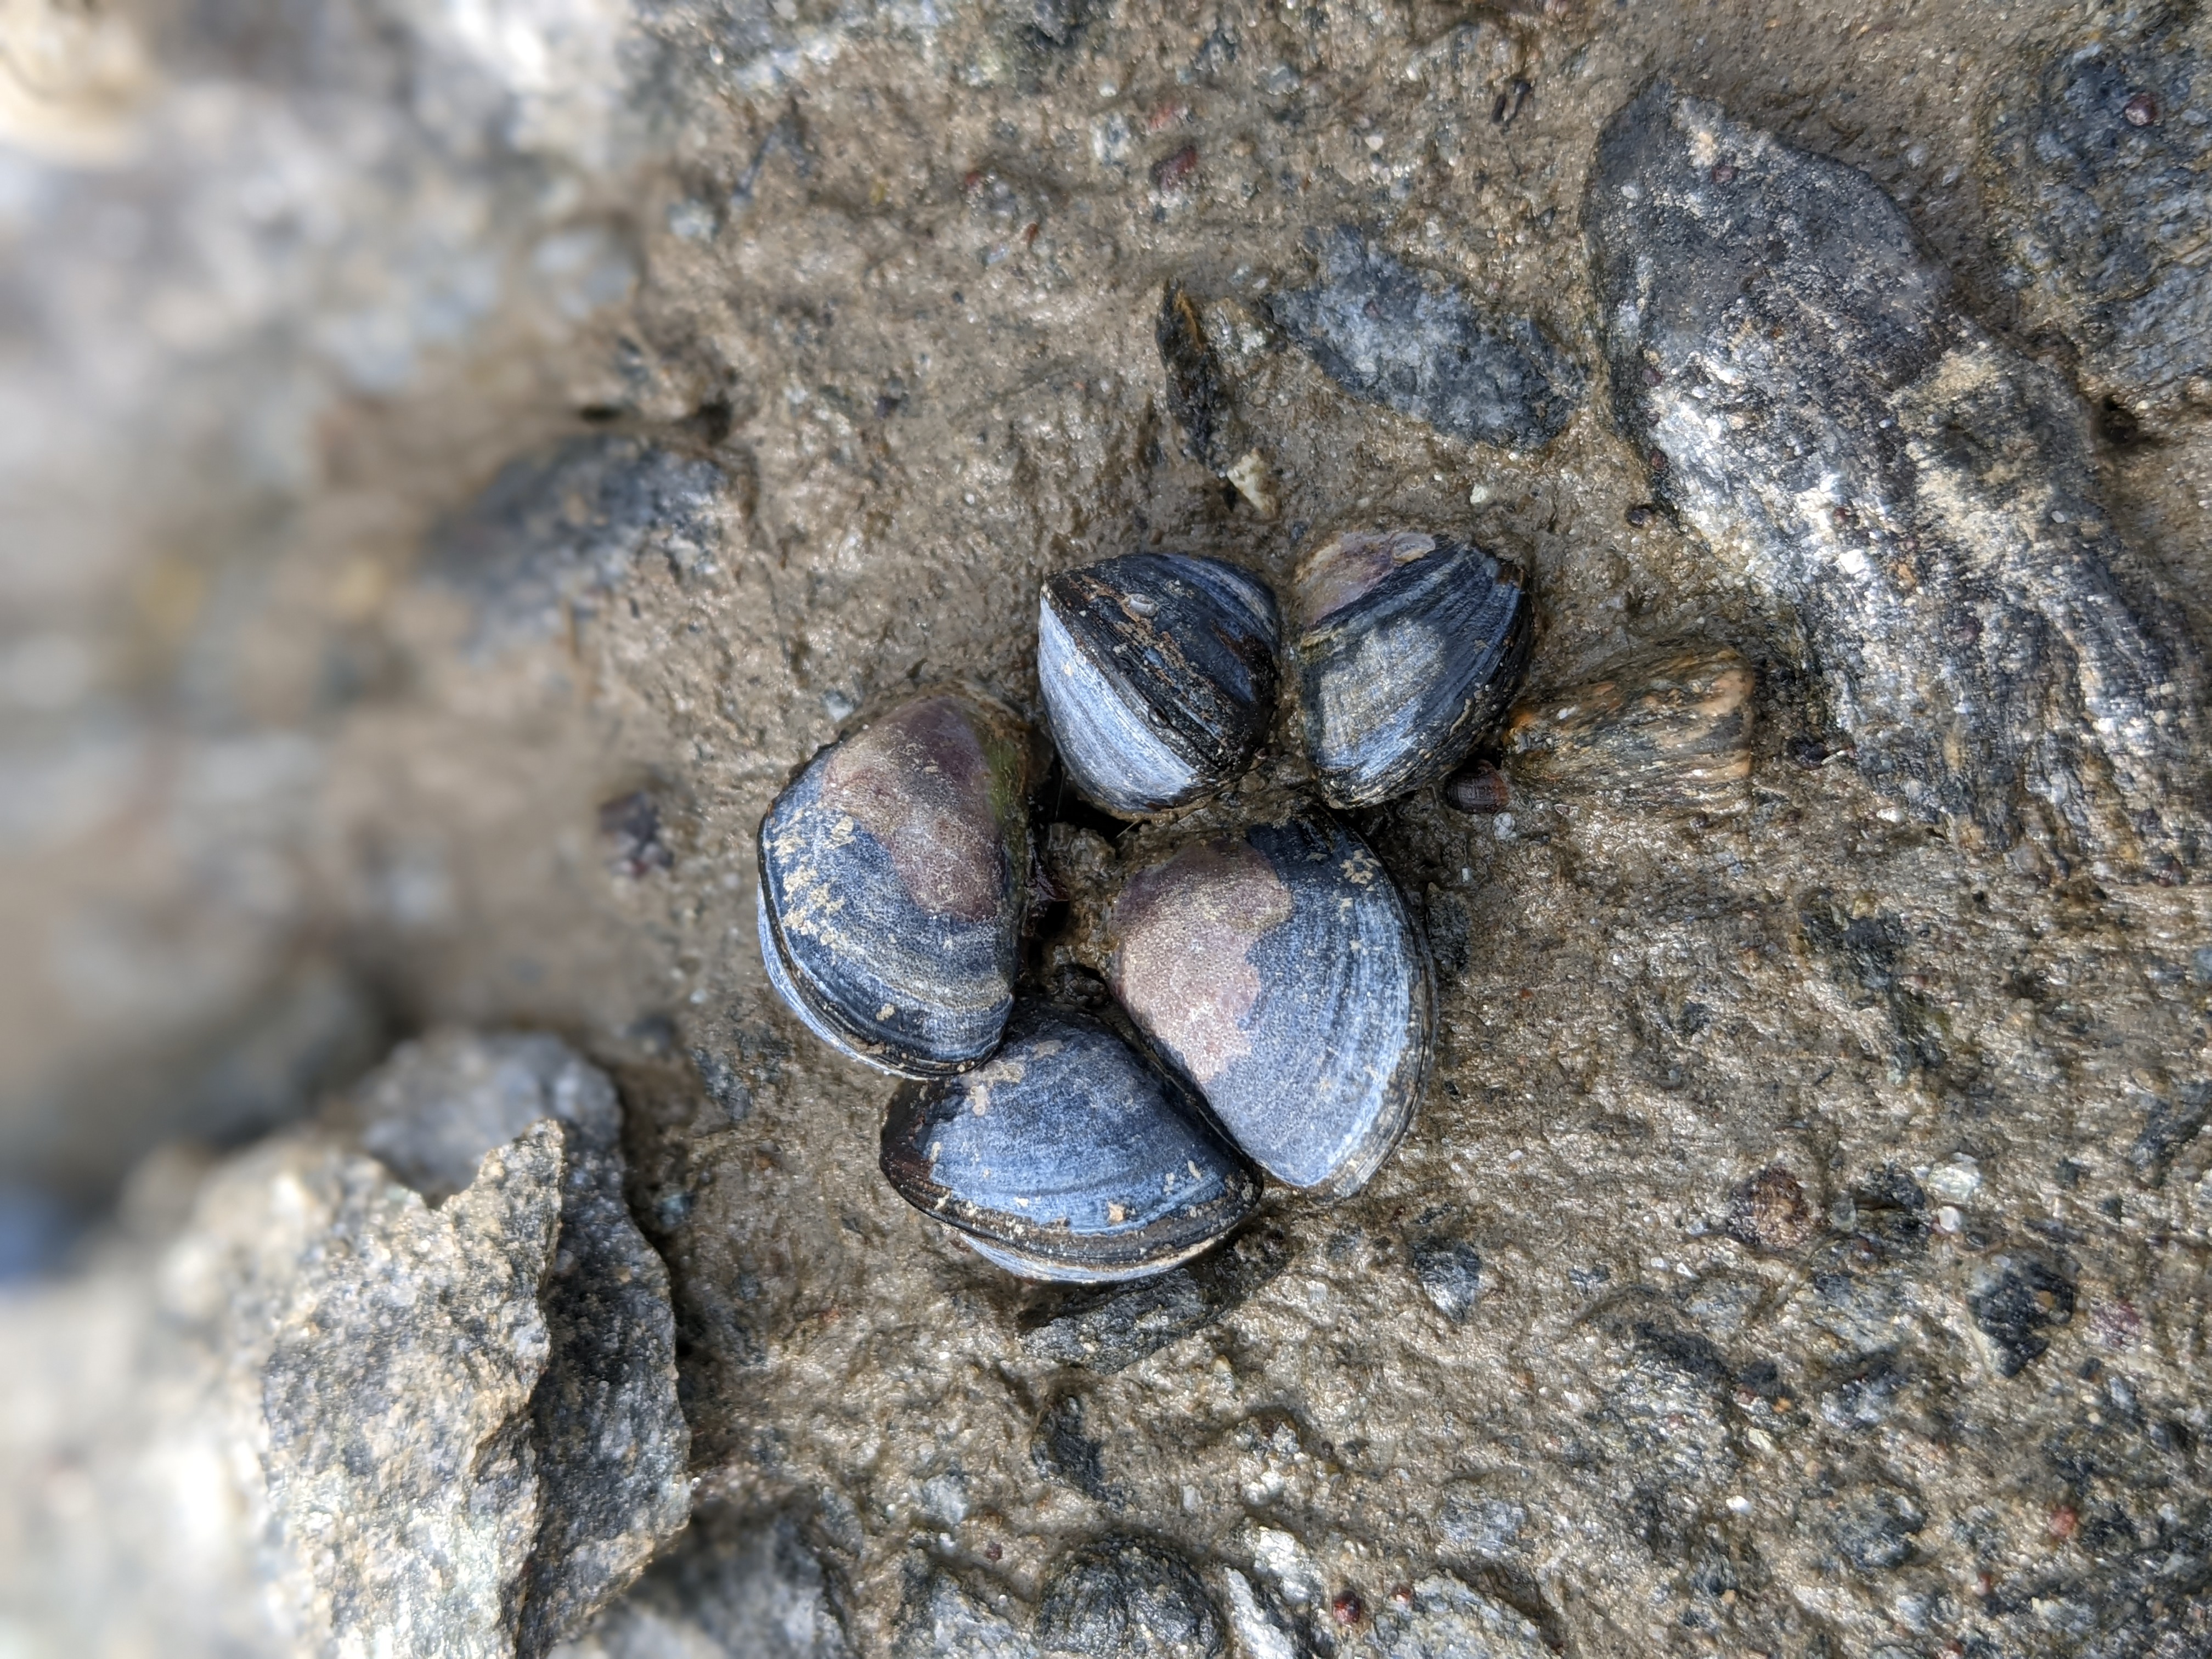 five small mussels half-buried in the sand